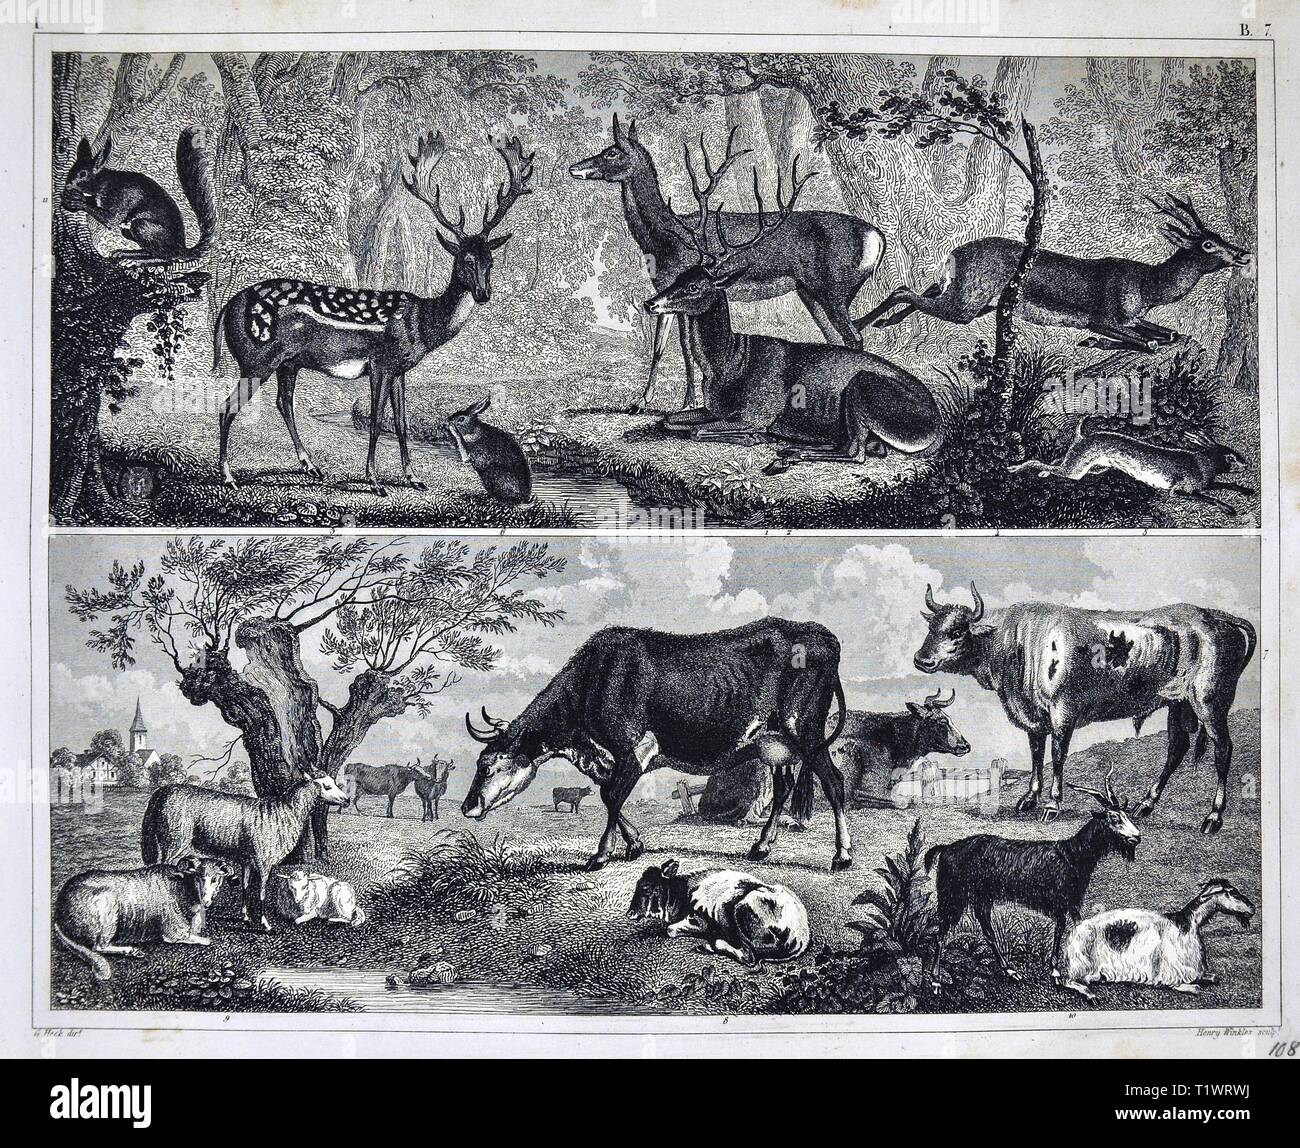 1849 Zoological Print - Wildlife Animals - Bovine Mammals Deer and Domestic Farm Animals including Cows, Sheep and Goats Stock Photo